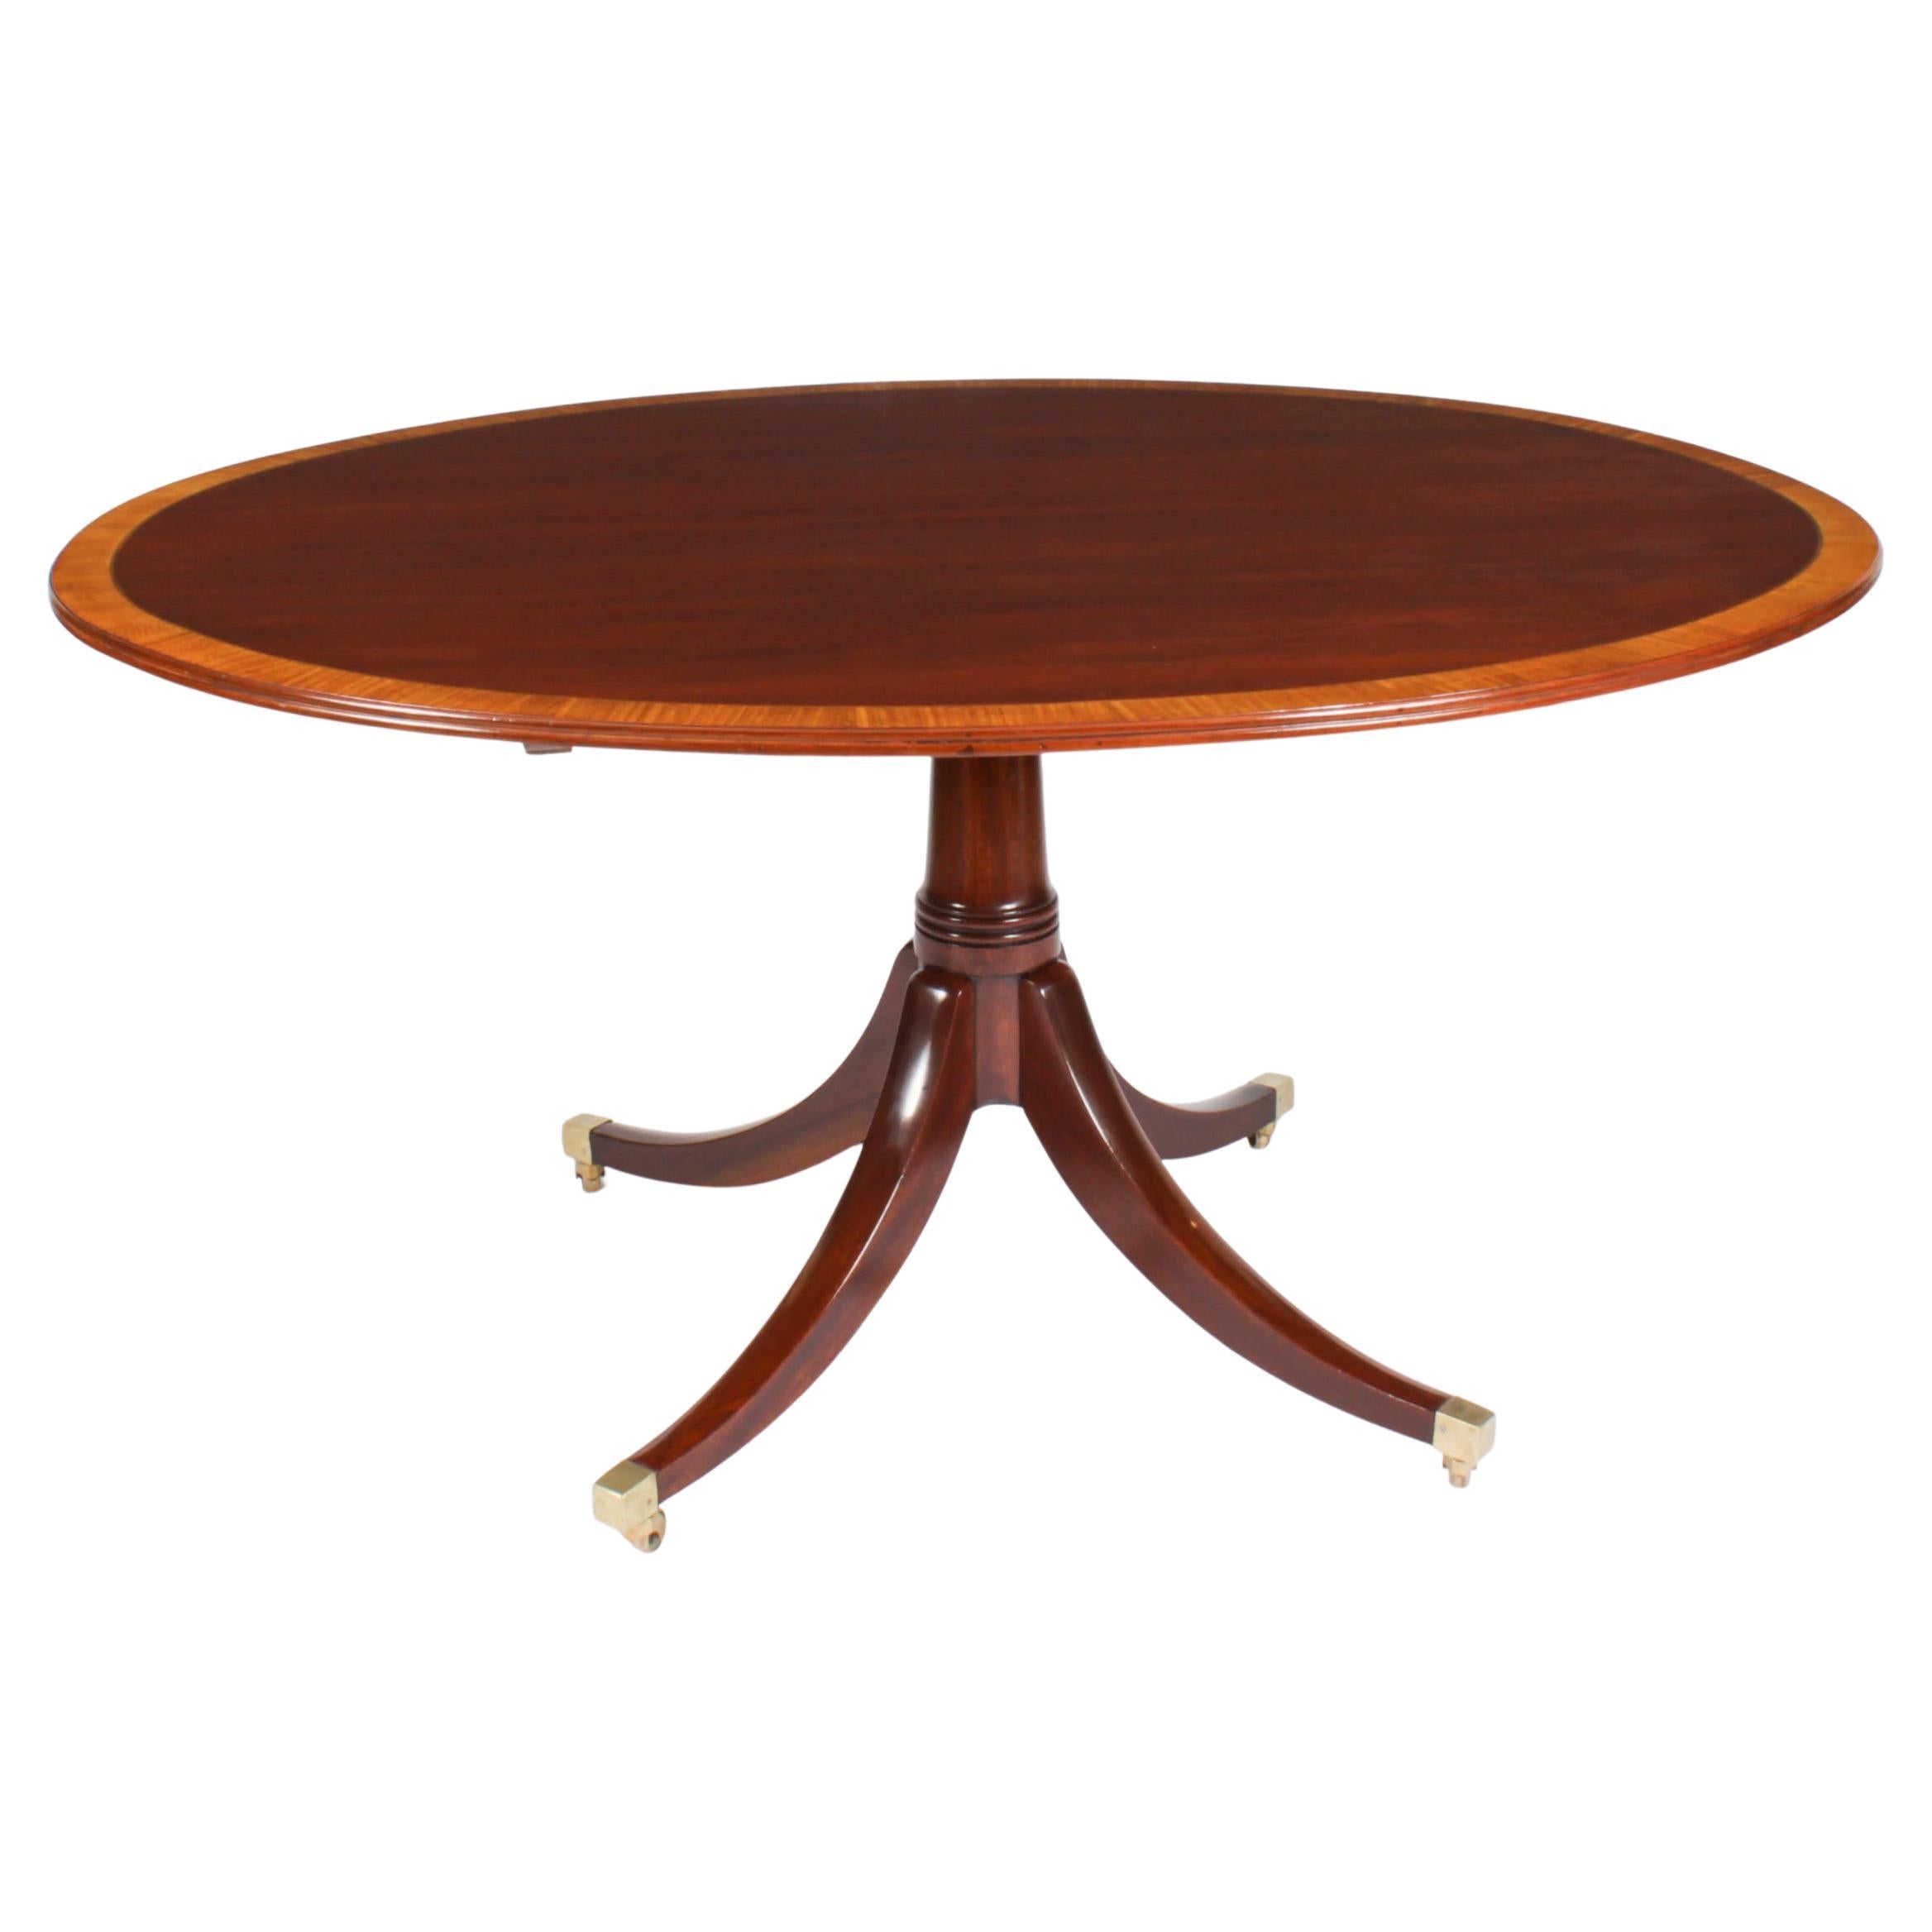 Antique Oval Mahogany Tilt Top Dining Table, Early 20th Century